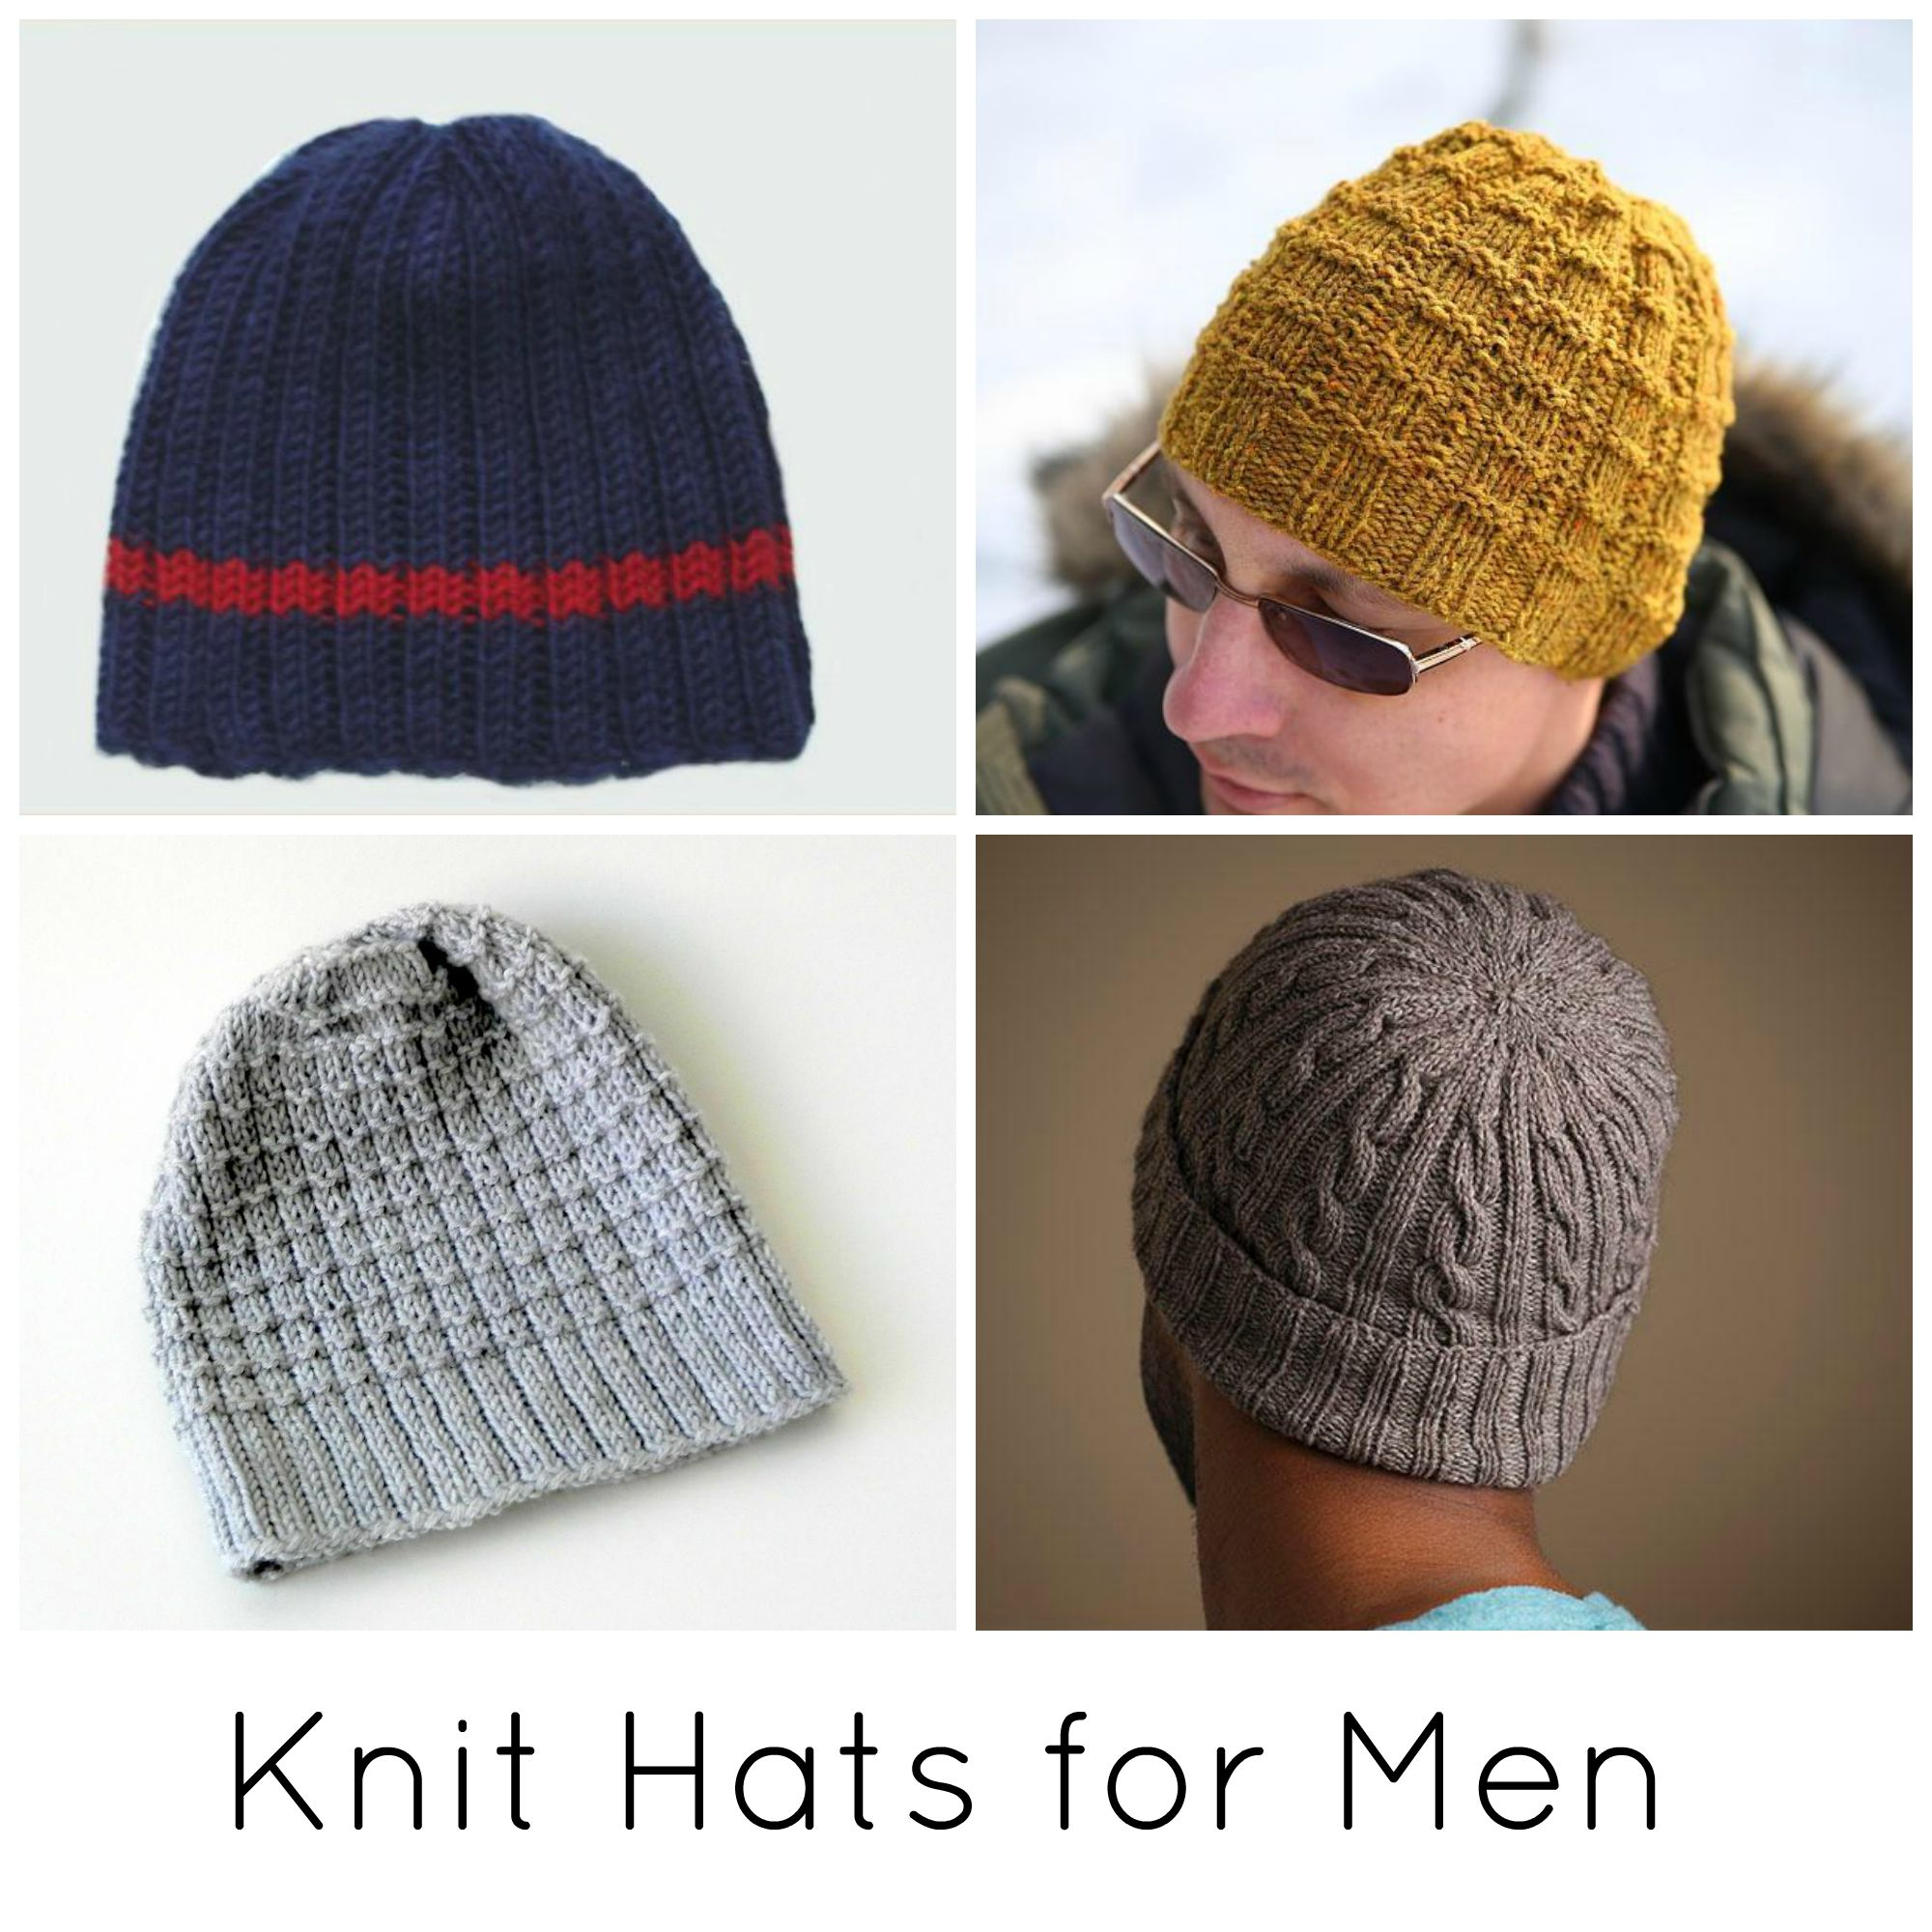 Knit Cap Patterns 8 Knit Hats For Men From Adventurous To Classic